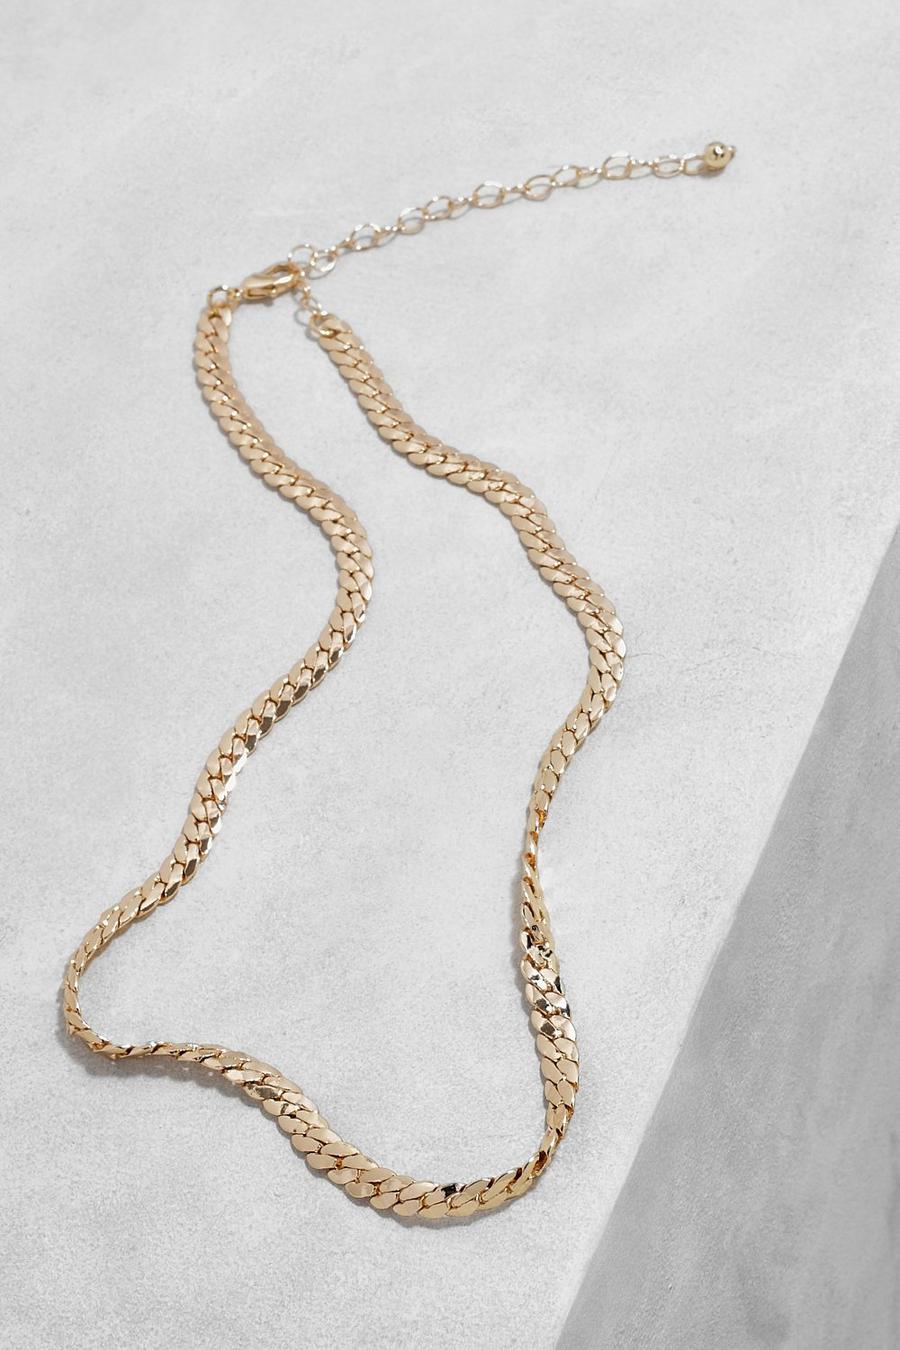 Gold metallic Textured Snake Chain Necklace